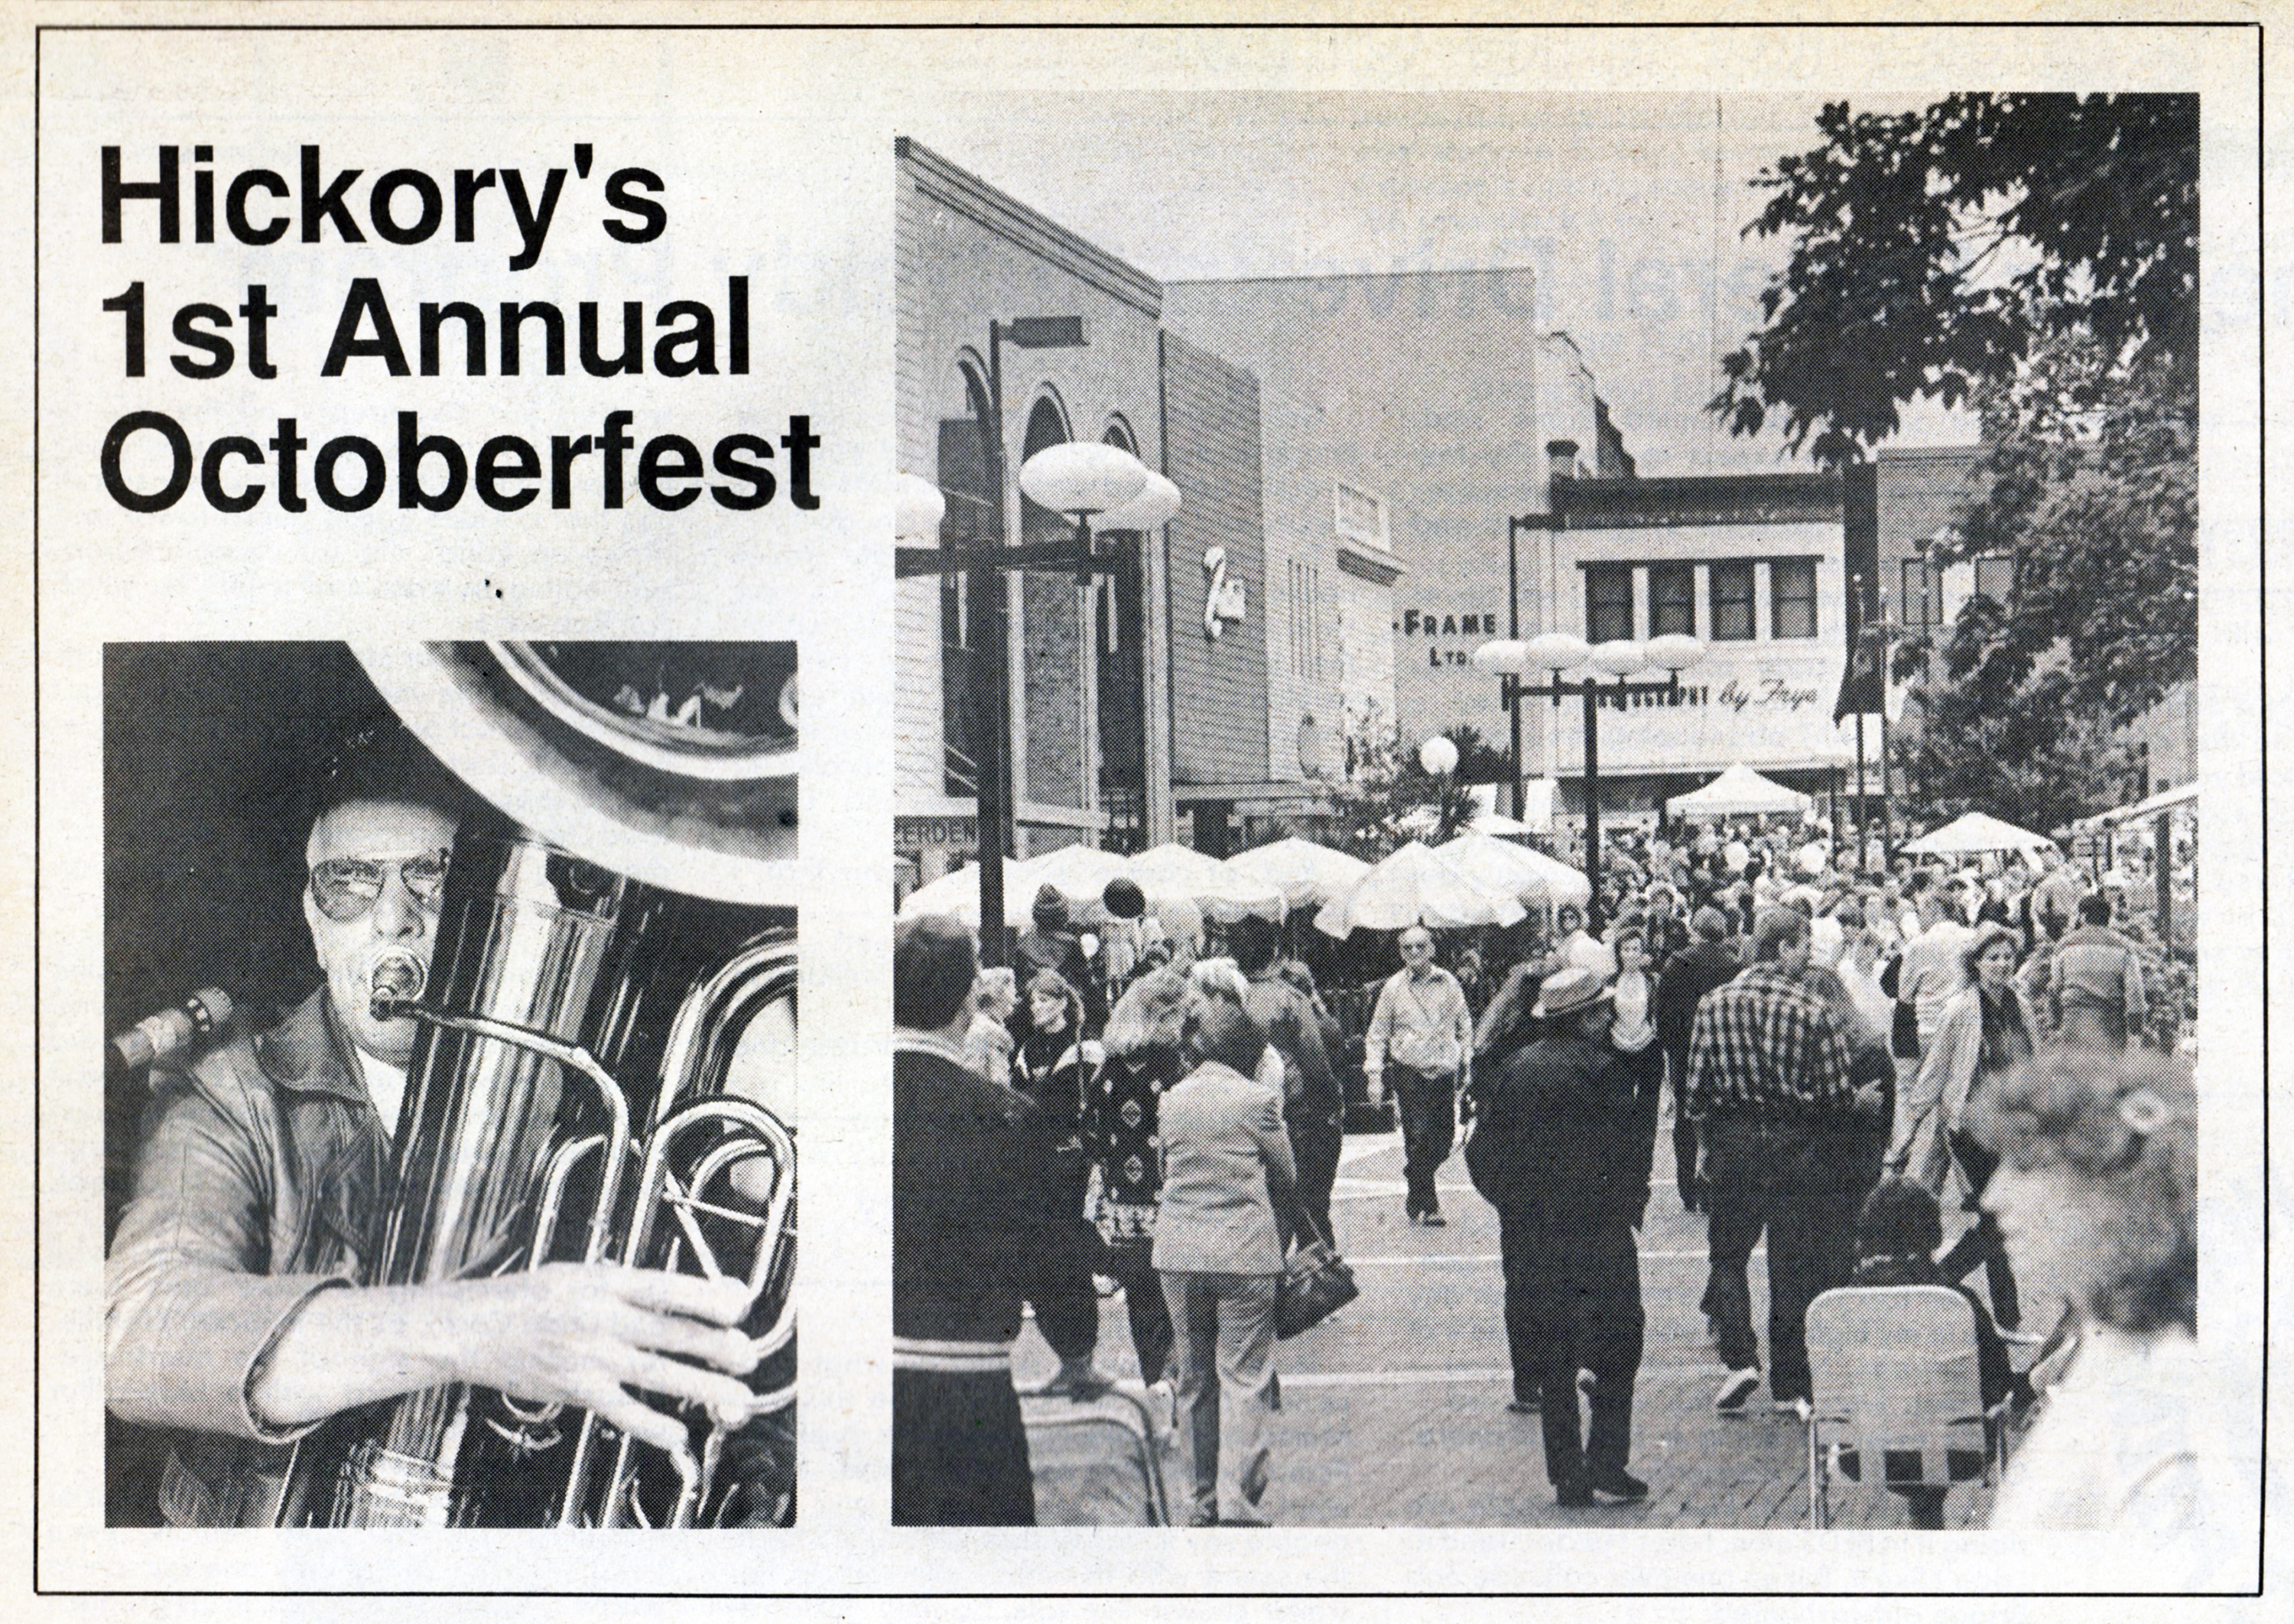 Photos from Hickory's 1st Annual Oktoberfest published October 16, 1986.